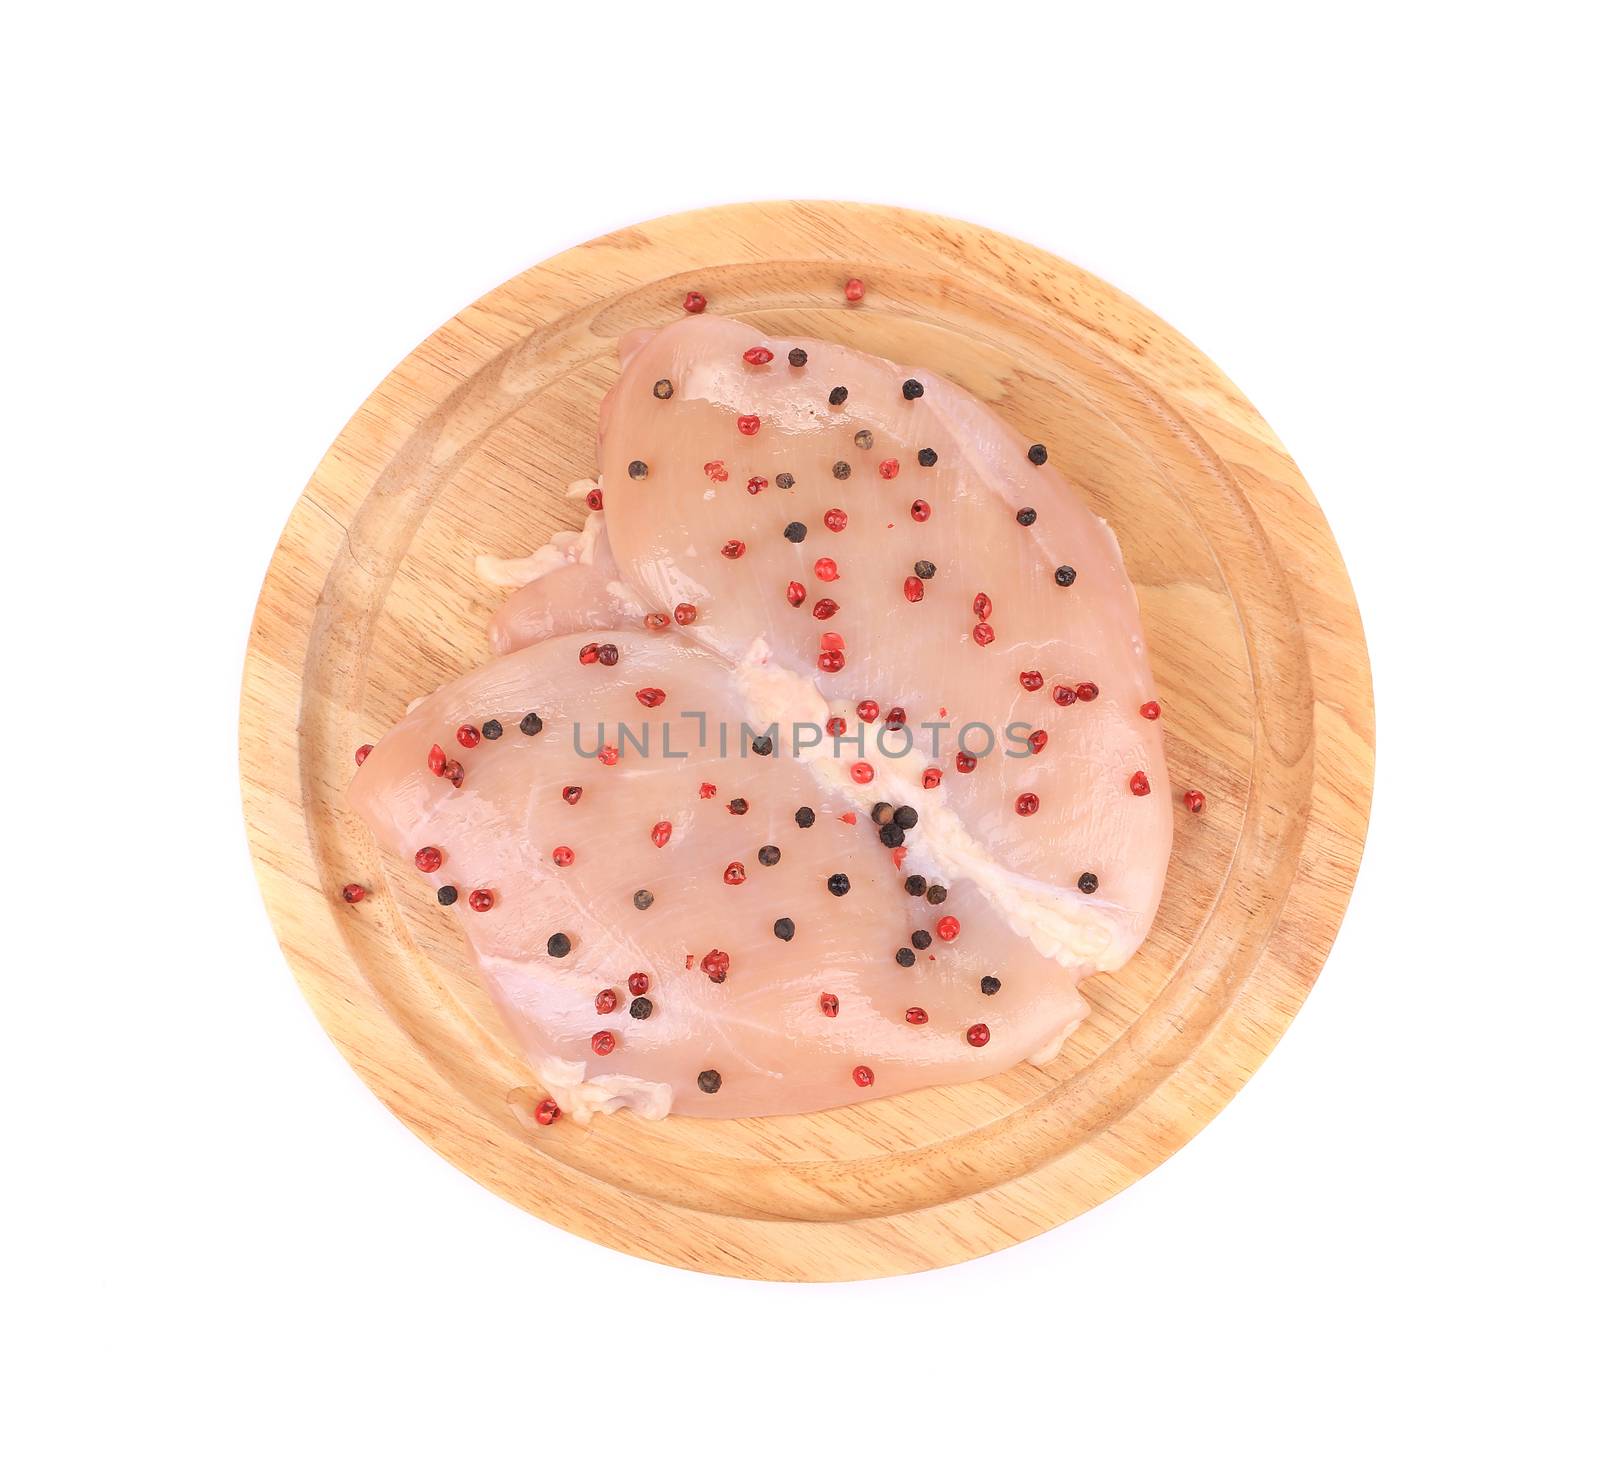 Raw chicken breast on wooden platter. Isolated on a white background.